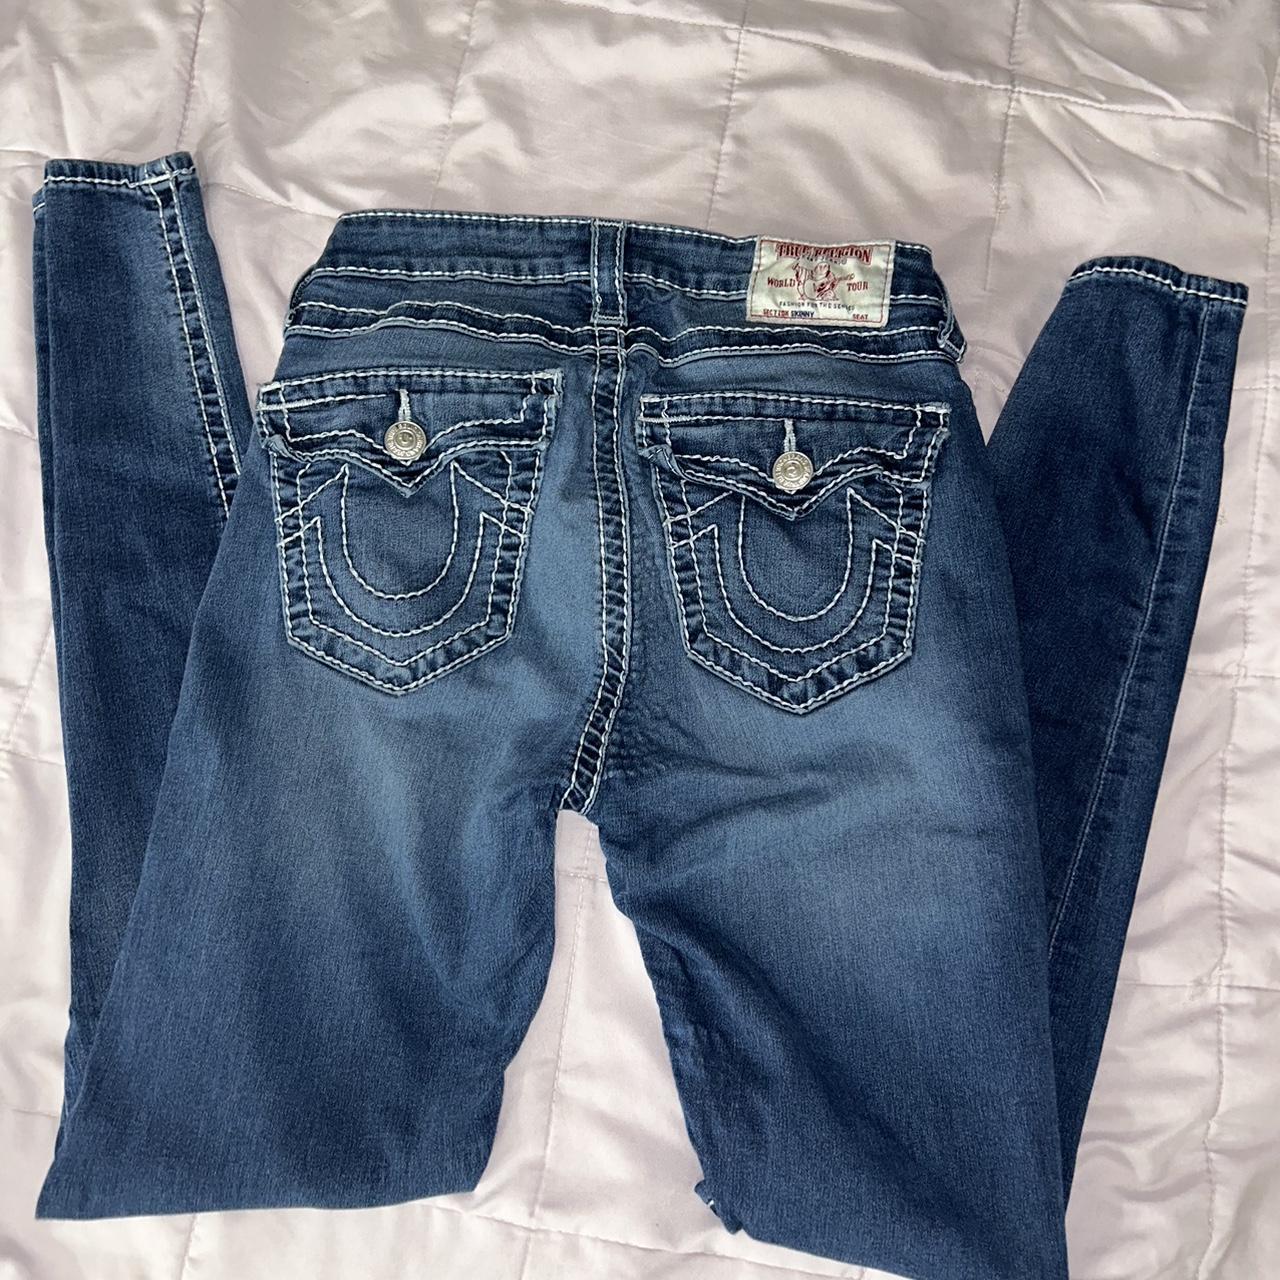 True Religion (Skinny Jeans) Size: 27 Authentic and... - Depop